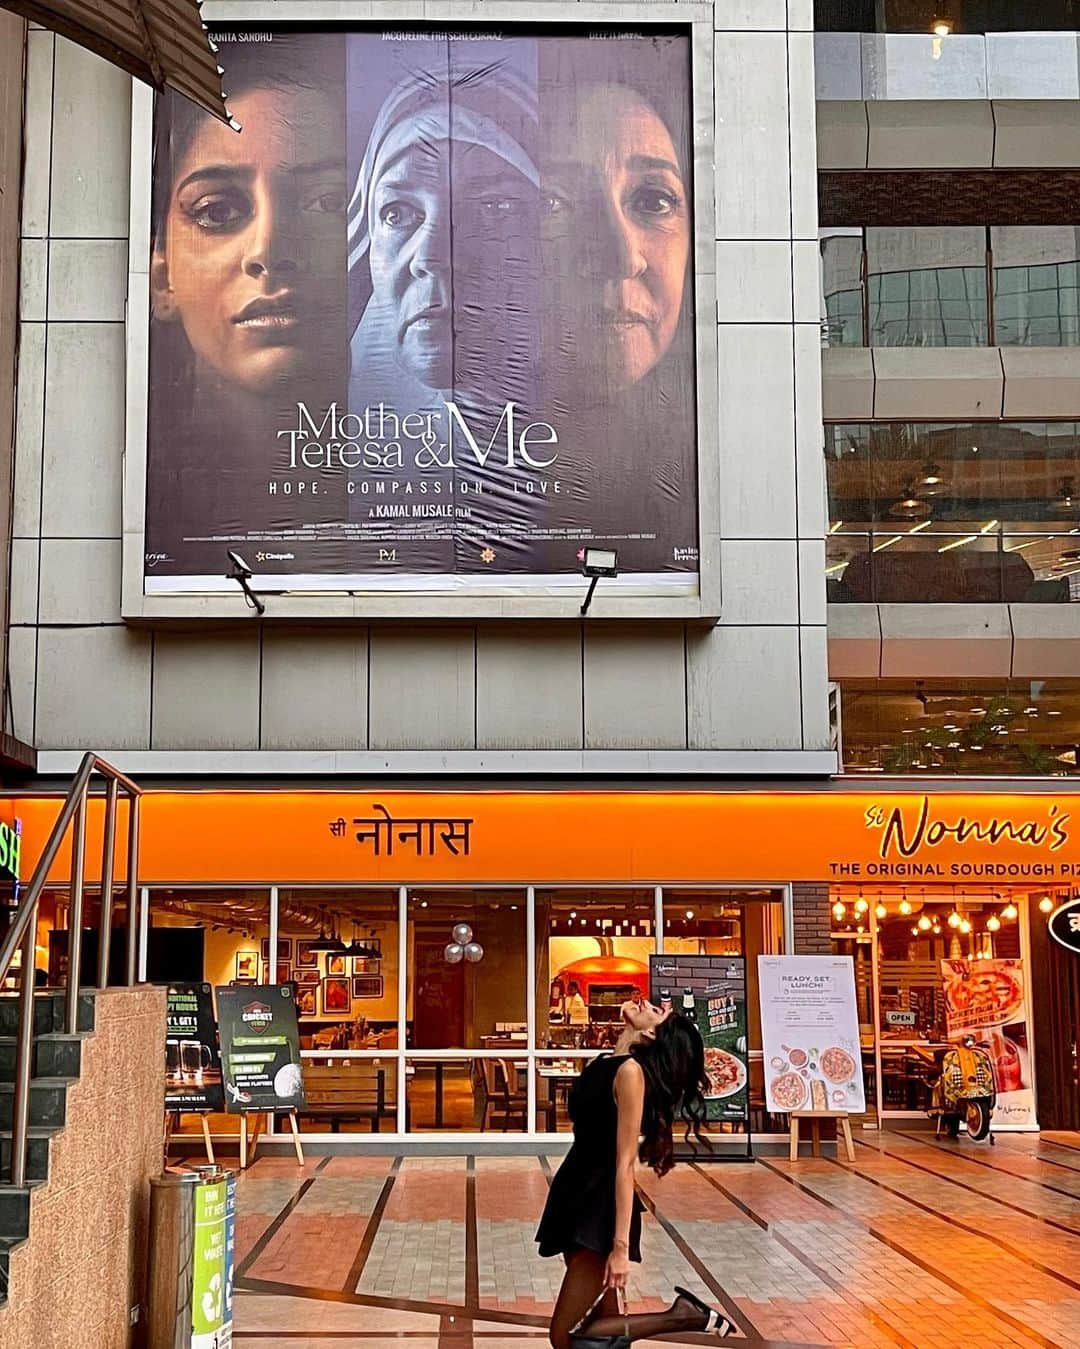 Banita Sandhuのインスタグラム：「IT’S FINALLY HERE!!!!! So thrilled you can watch #MotherTeresaAndMe in cinemas now & 100% of the proceeds go to charity to aid education and healthcare for children in India. please please go and support our little movie made with so much hope, love and compassion for an even greater cause 🥹 it means the absolute world to me ❤️」